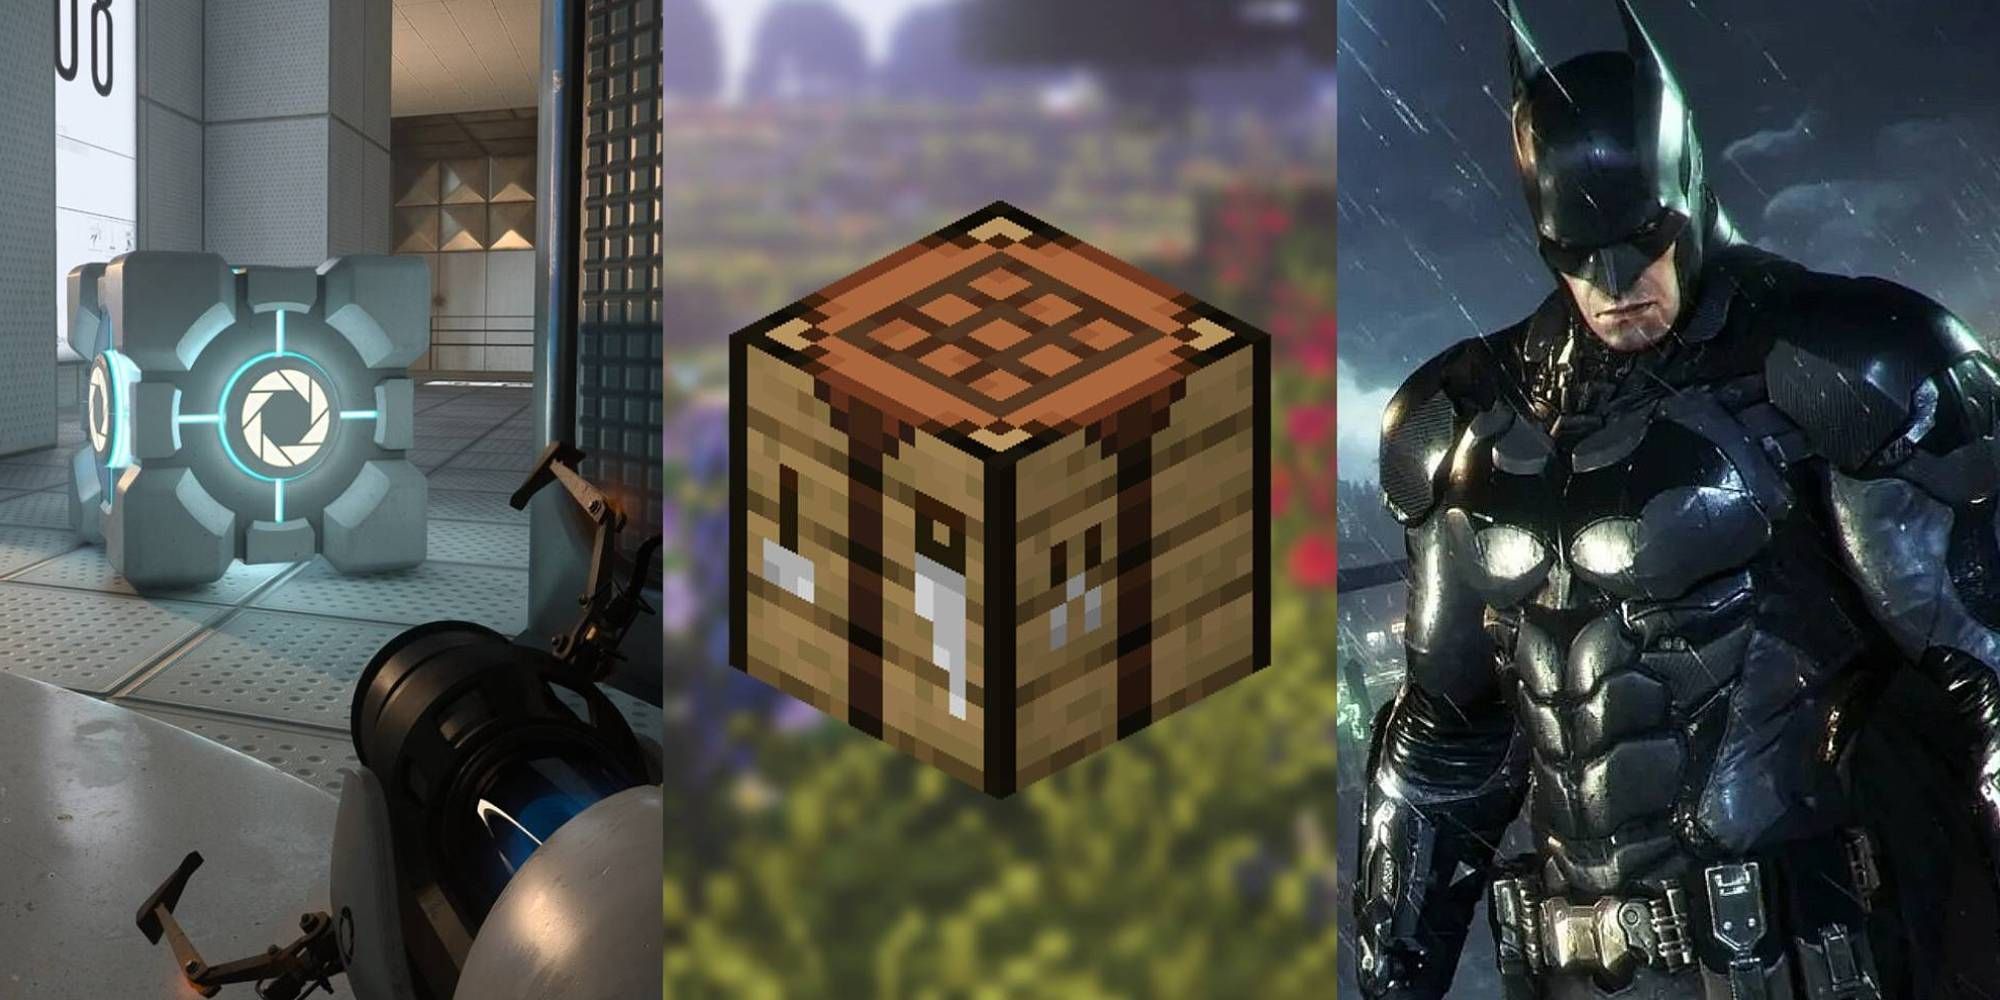 A collage of images featuring Portal, Minecraft and Batman of Arkham Asylum